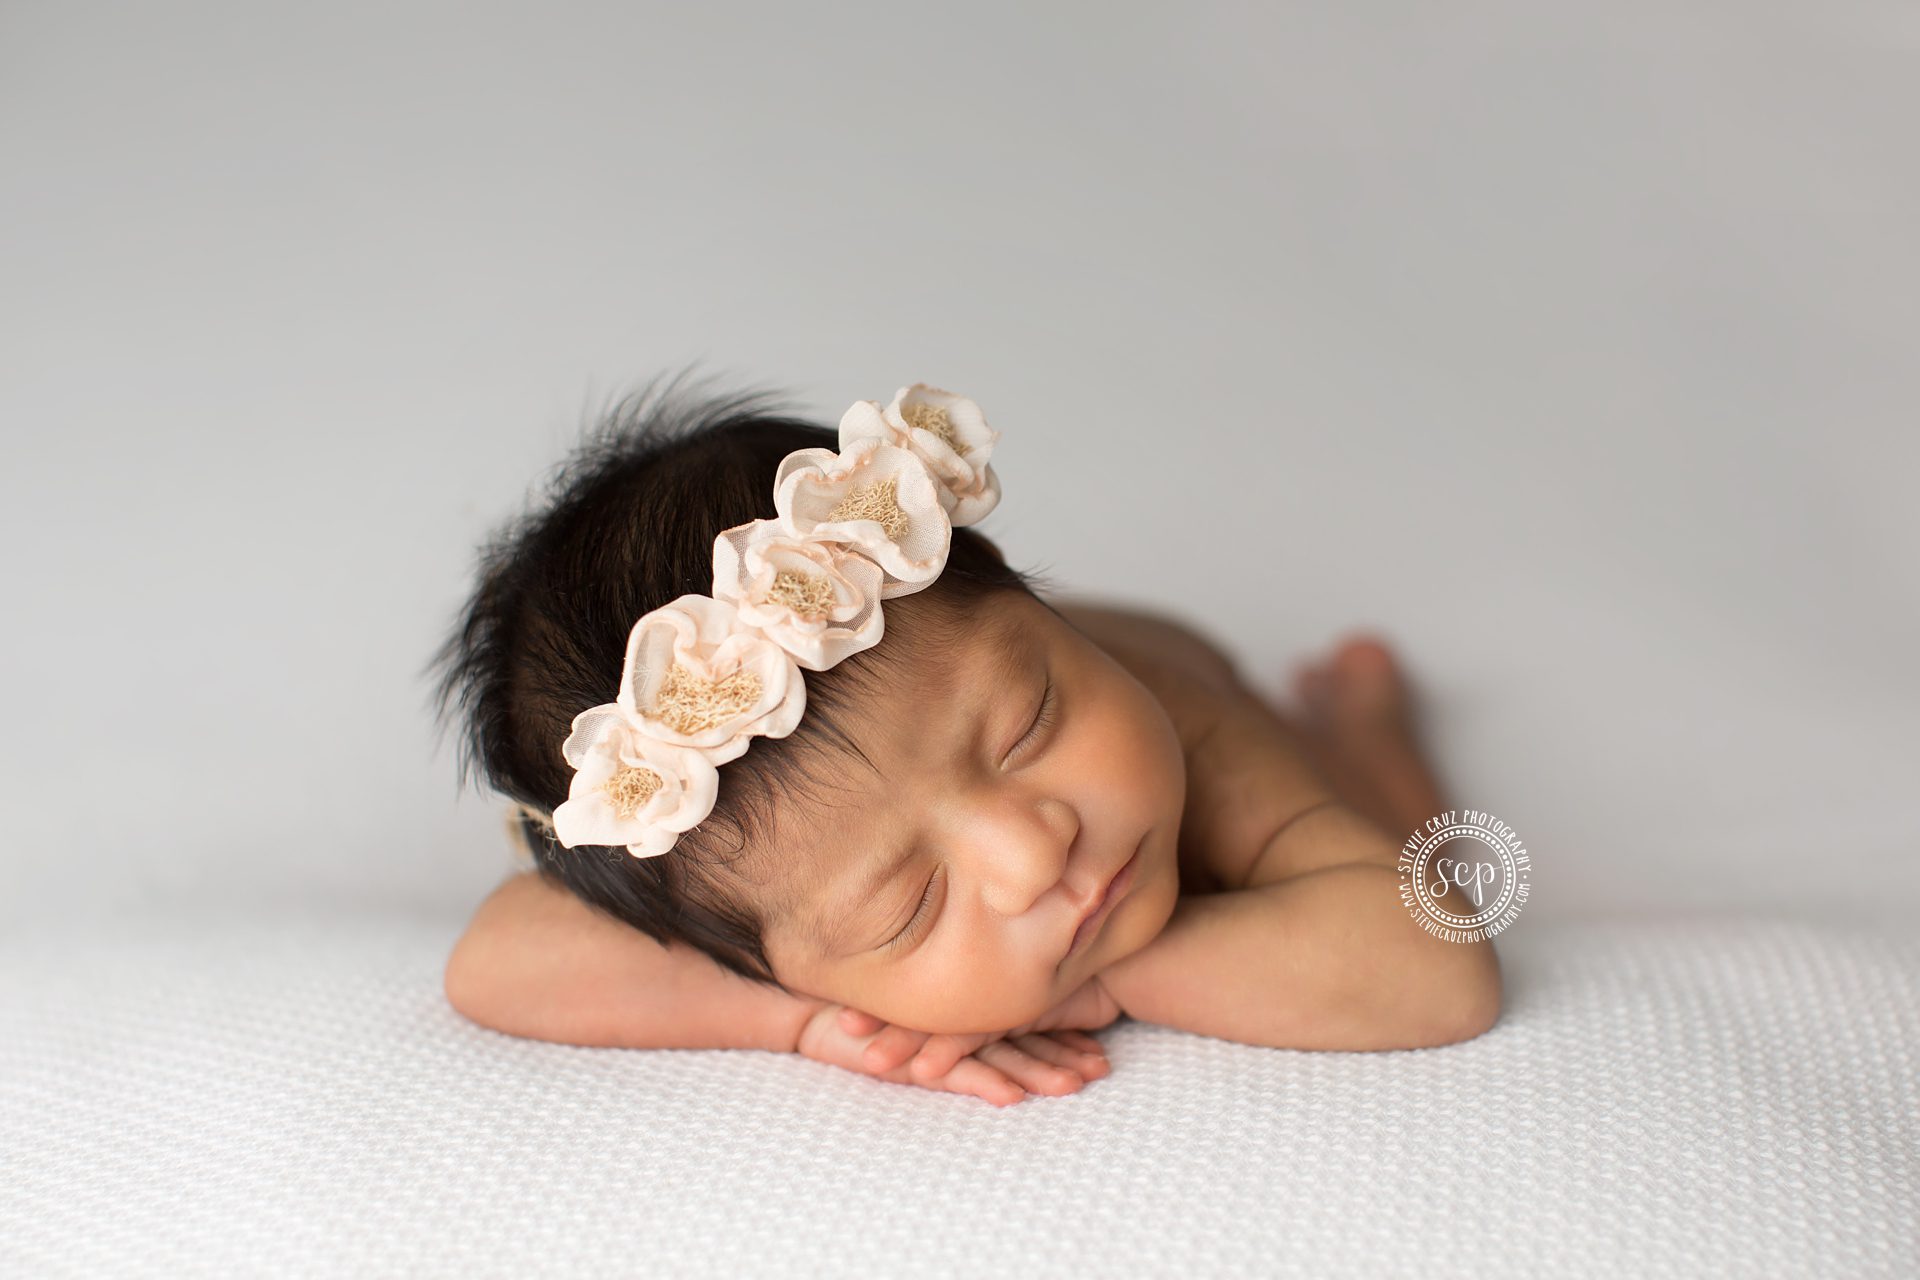 Anaheim Hills professional photographer specializes in newborn baby photography 